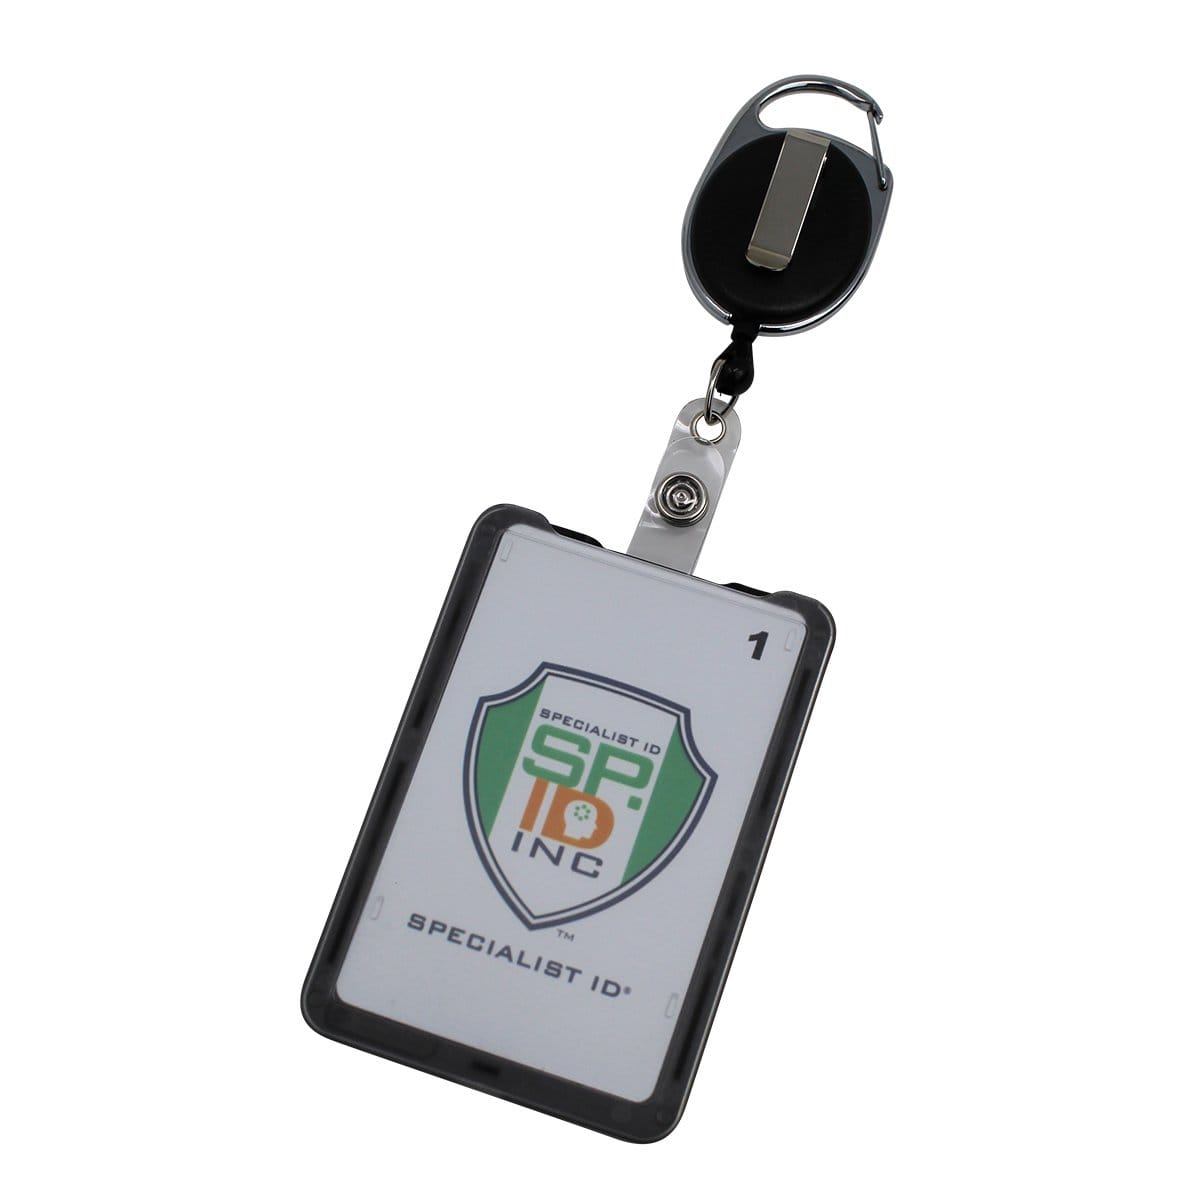 Hard Plastic 3 Card Badge Holder with Badge Reel - Retractable ID Lanyard Features Belt Clip &  Carabiner - Rigid Vertical CAC Holder - Top Load Holds Three Cards by SpecialistID